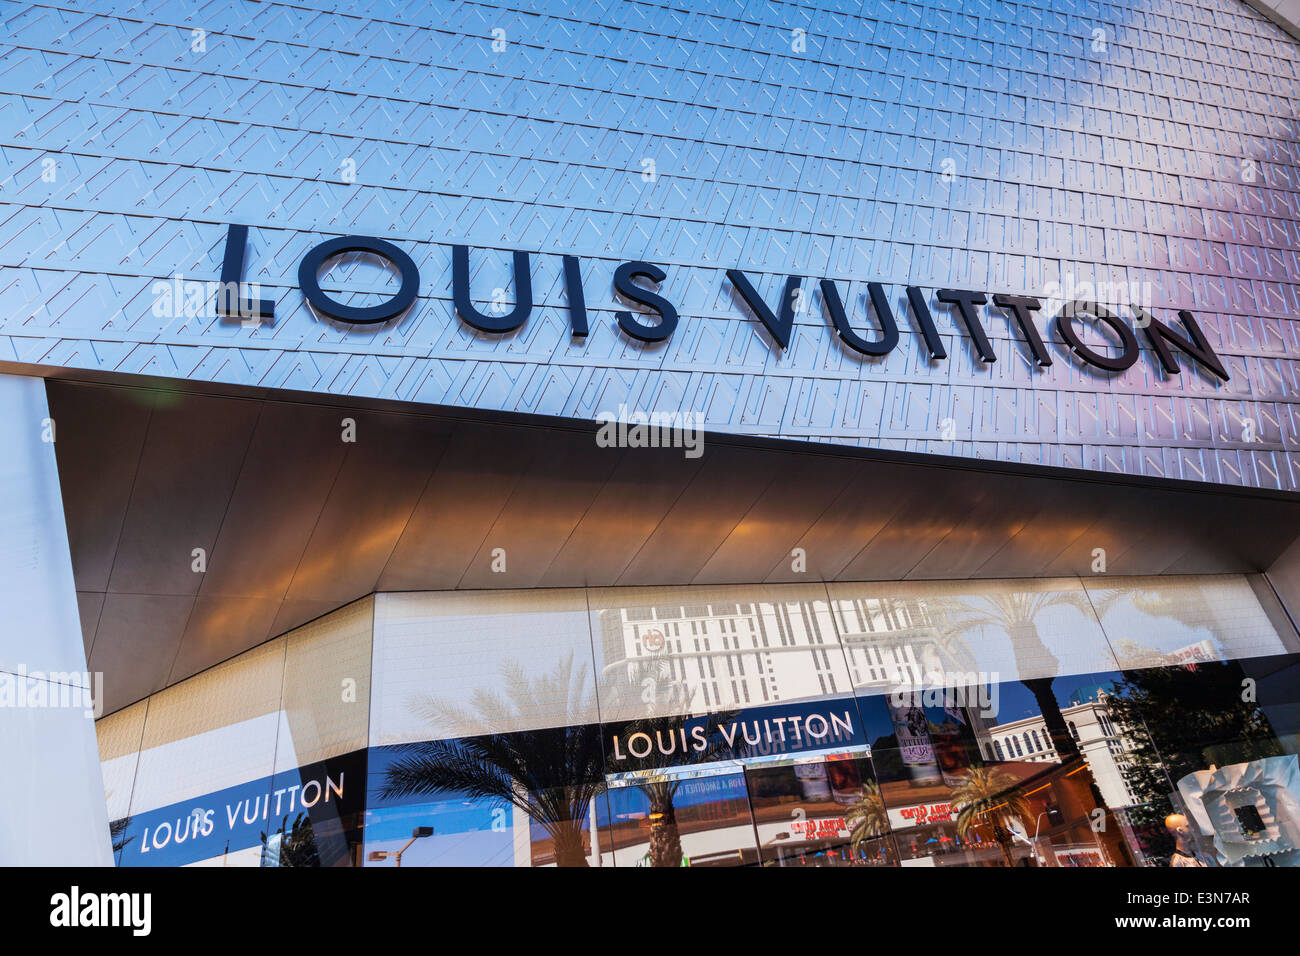 Louis Vuitton Store Sign In Berlin Germany Stock Photo - Download